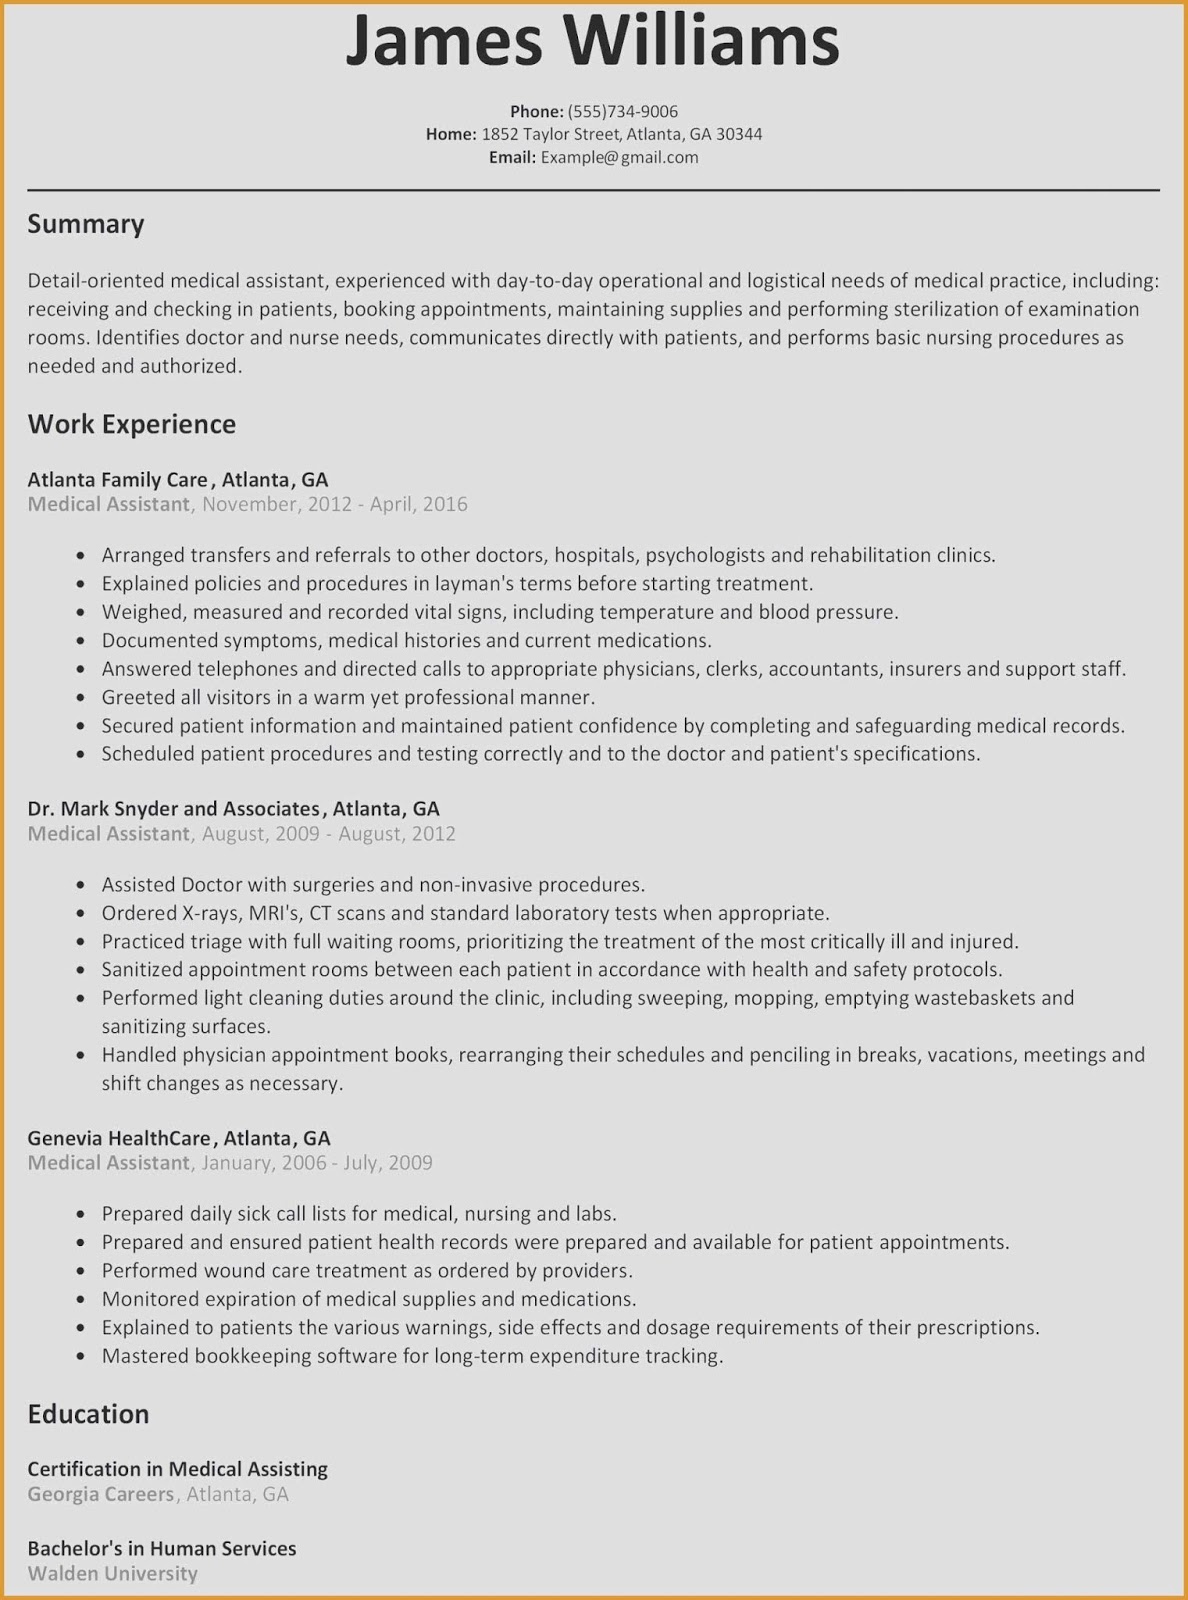 simple resumes examples examples of basic resumes for jobs basic examples of resumes simple resume examples word simple resume examples simple resume examples pdf simple resume summary examples simple resume examples for jobs simple resume examples australia simple resume examples 2018 simple resume examples for students simple resume examples 2019